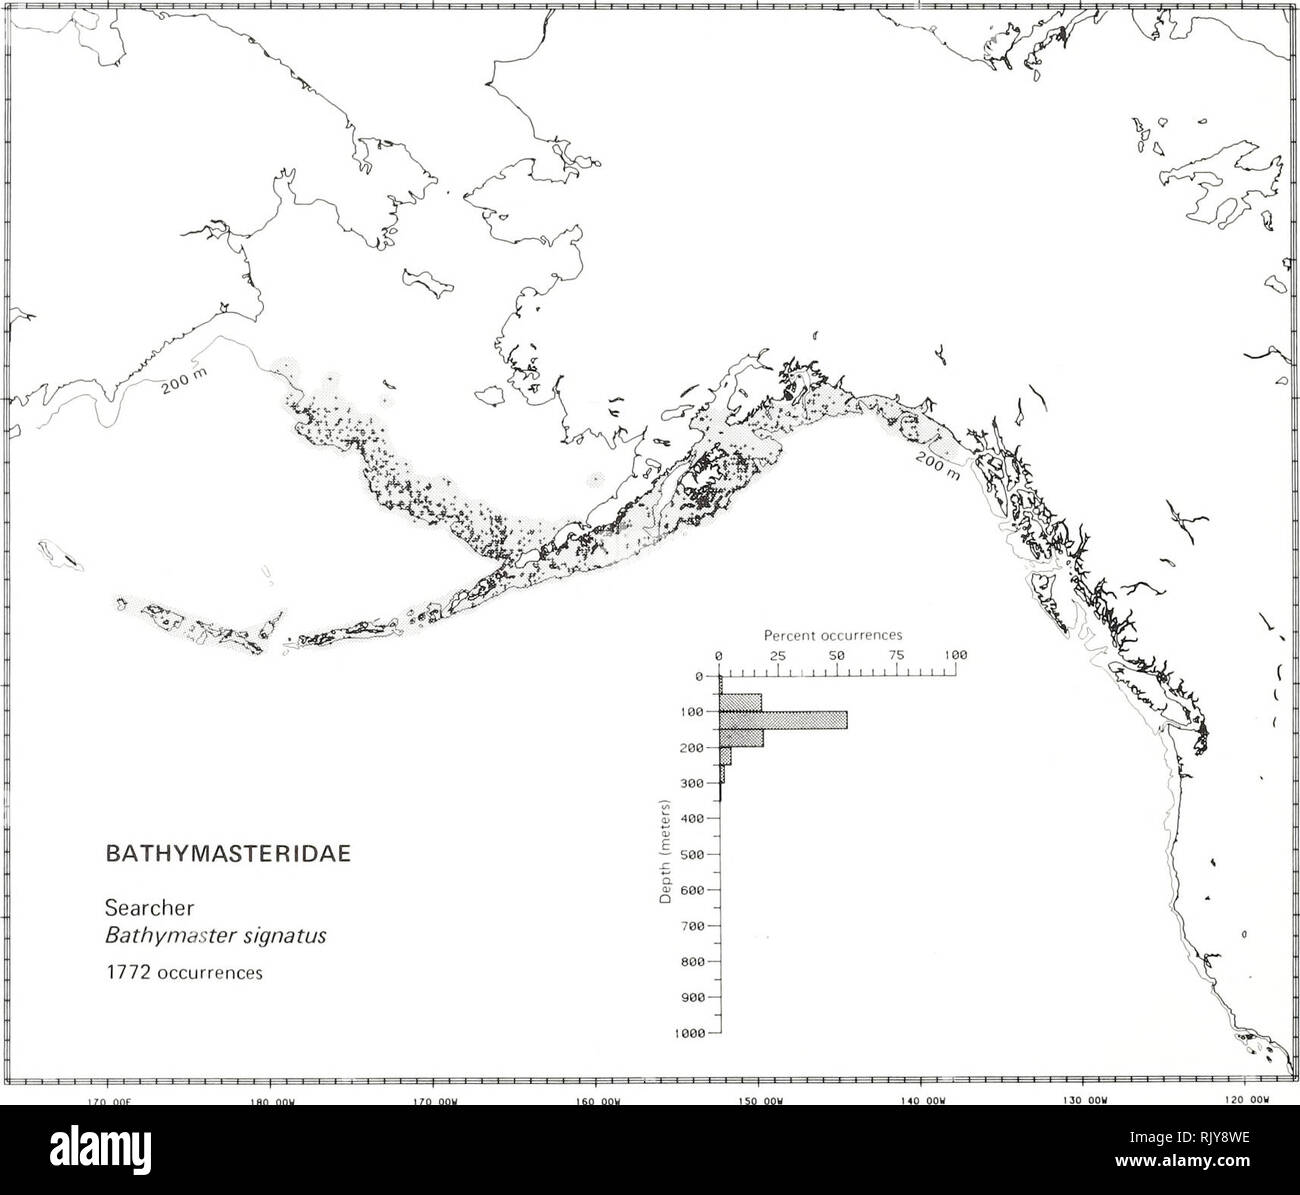 . Atlas and zoogeography of common fishes in the Bering Sea and Northeastern Pacific / M. James Allen, Gary B. Smith. Fishes Bering Sea Geographical distribution.. SEARCHER, Bathymaster signatus Cope 1873 Bathymasteridae: Ronquils Literature Reported from eastern Kamchatka and the Commander Islands to the East Siberian Sea in the Arctic, south through the Bering Sea, west in the Aleutian Islands to Amchitka Island, and east to Washington (Quast and Hall 1972; Simenstad et al. 1977; Eschmeyer and Herald 1983), at depths of 0 to 380 m (Fedorov 1973a; Howe 1981). Survey data Found from Navarin Ca Stock Photo